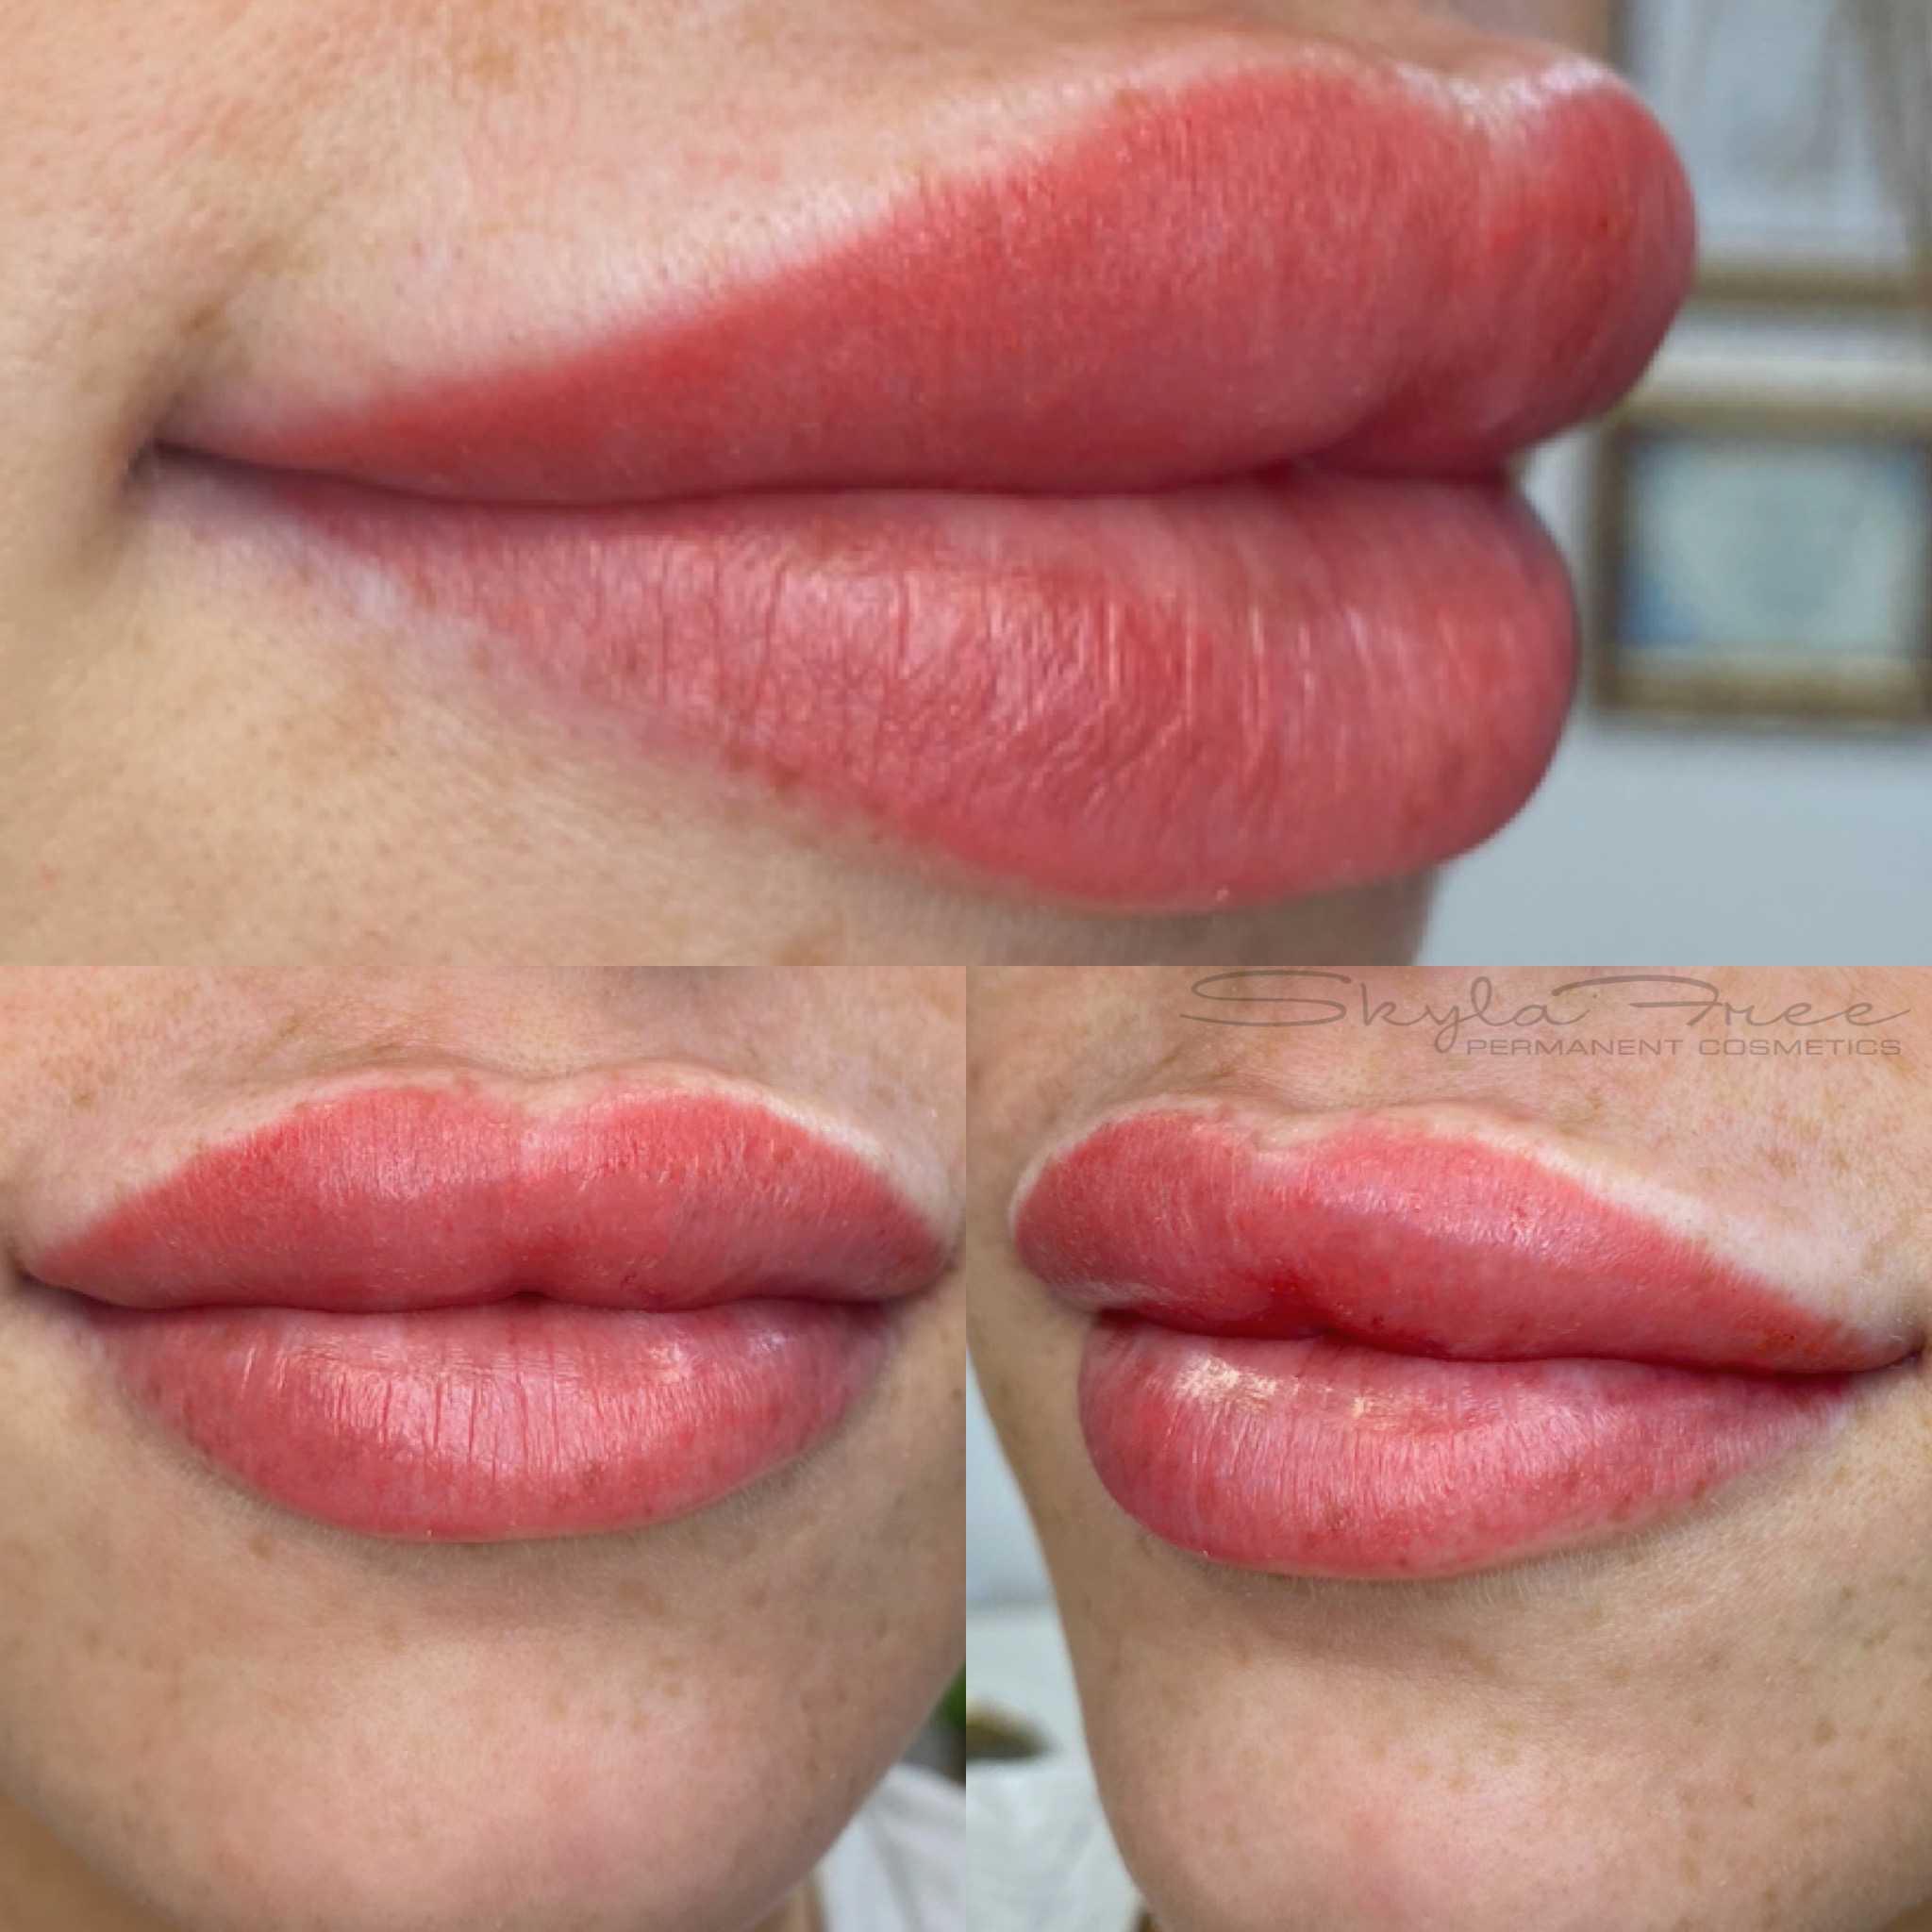 Lip Blushing done by Pretty In Ink